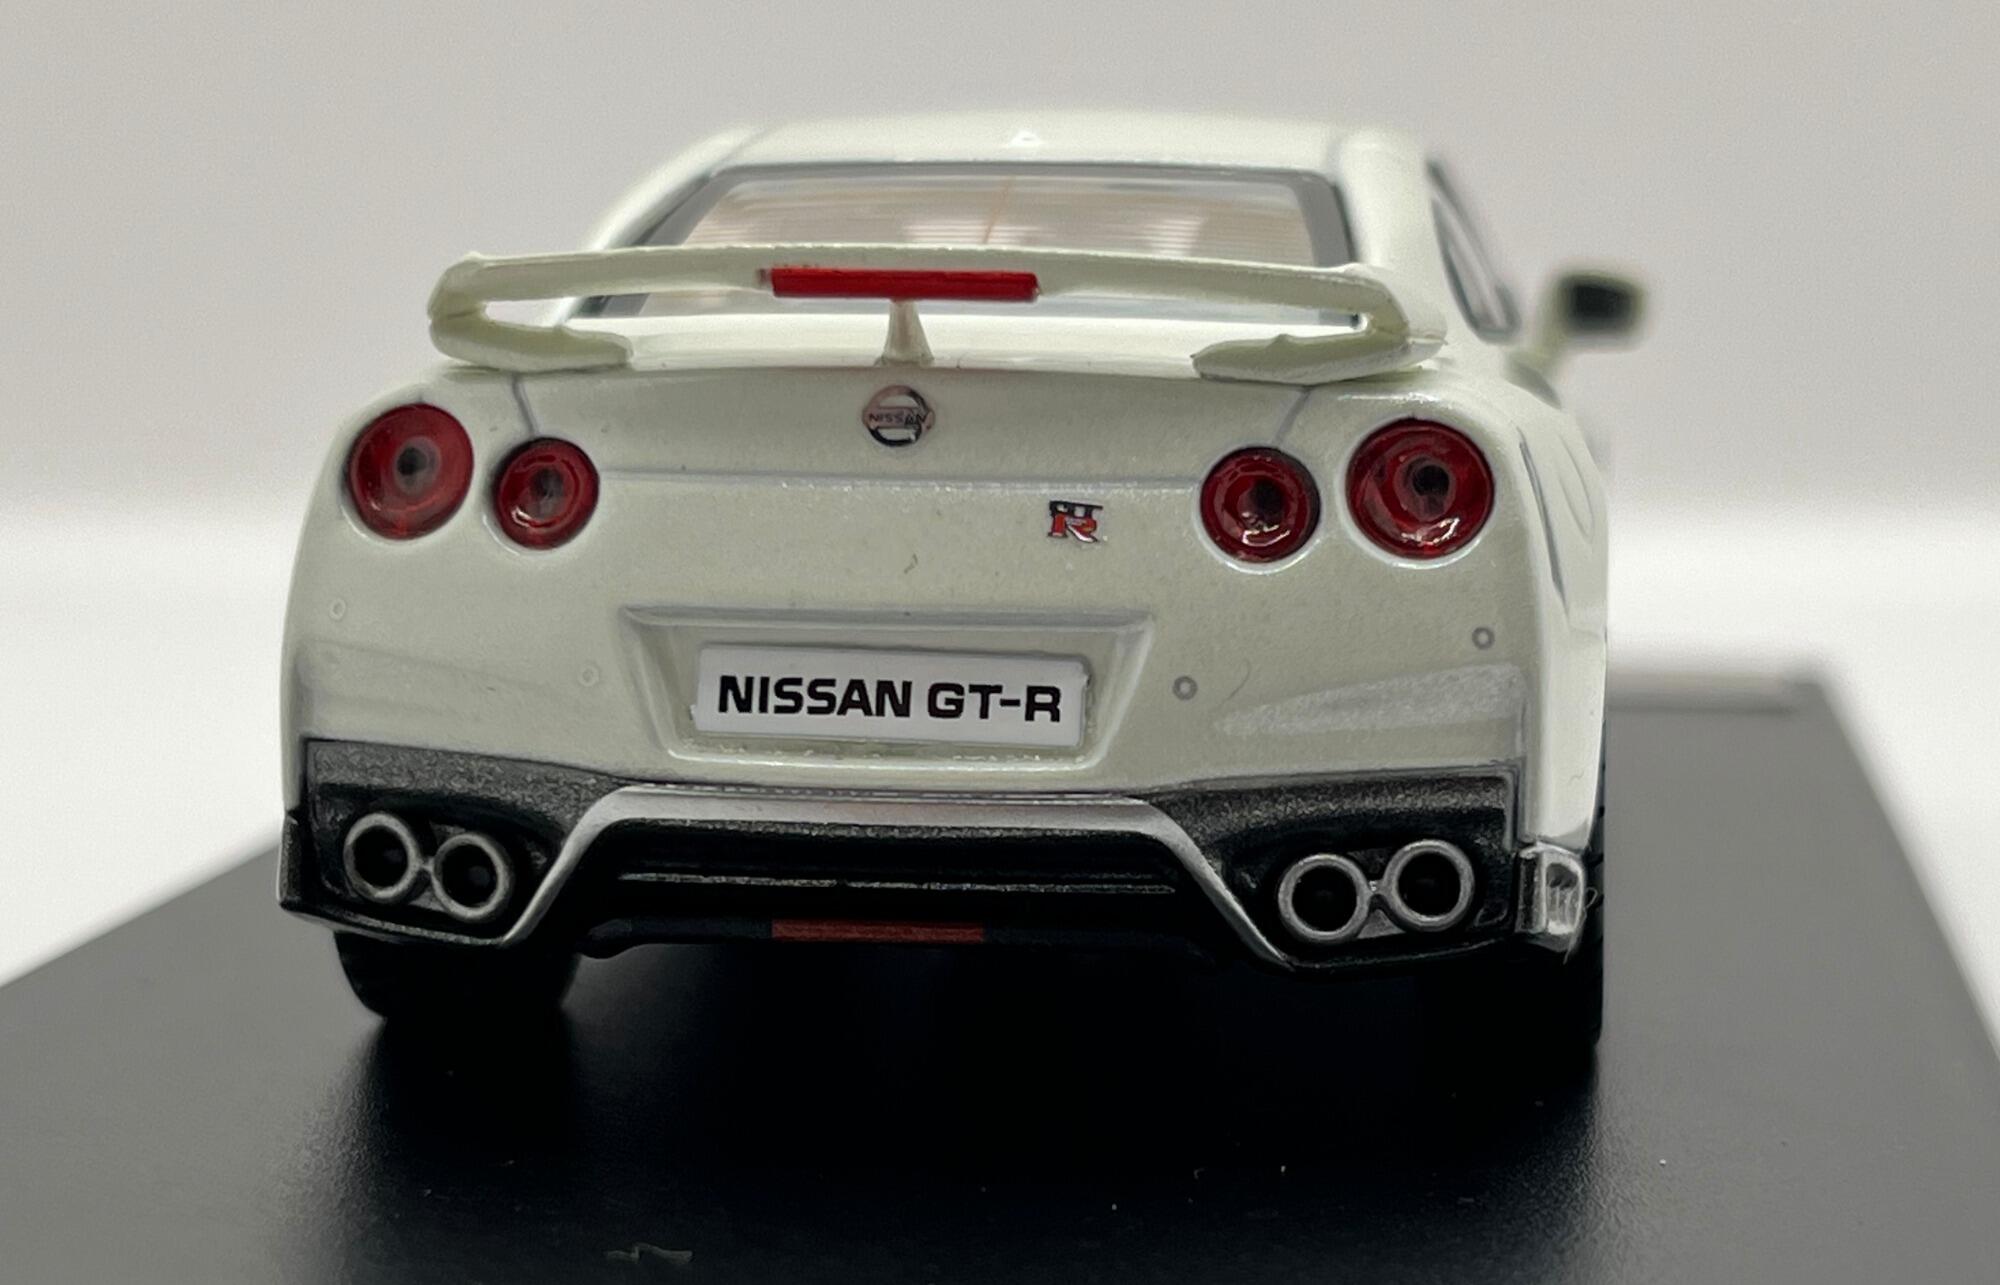 Nissan GT-R 2017 in metallic white, 1:43 scale diecast car by Premium X, Limited Edition